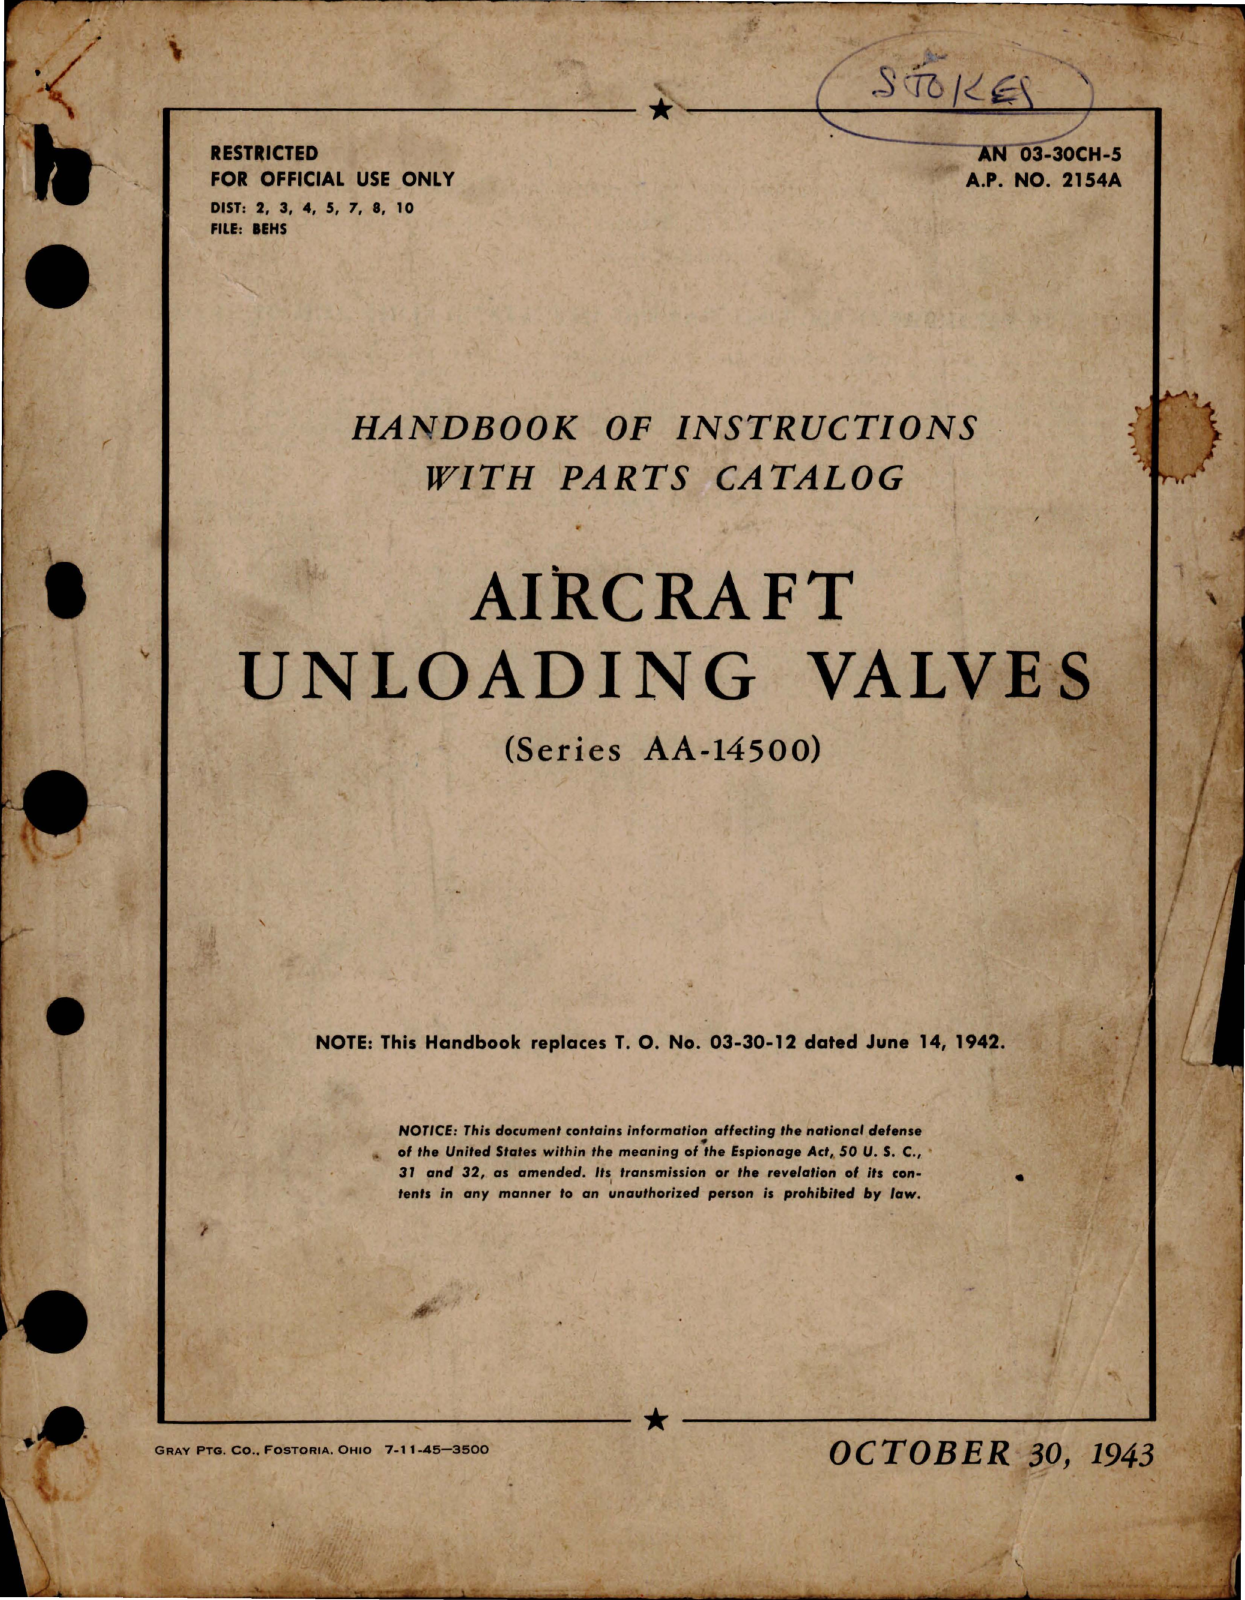 Sample page 1 from AirCorps Library document: Instructions with Parts Catalog for Aircraft Unloading Valves - Series AA-14500